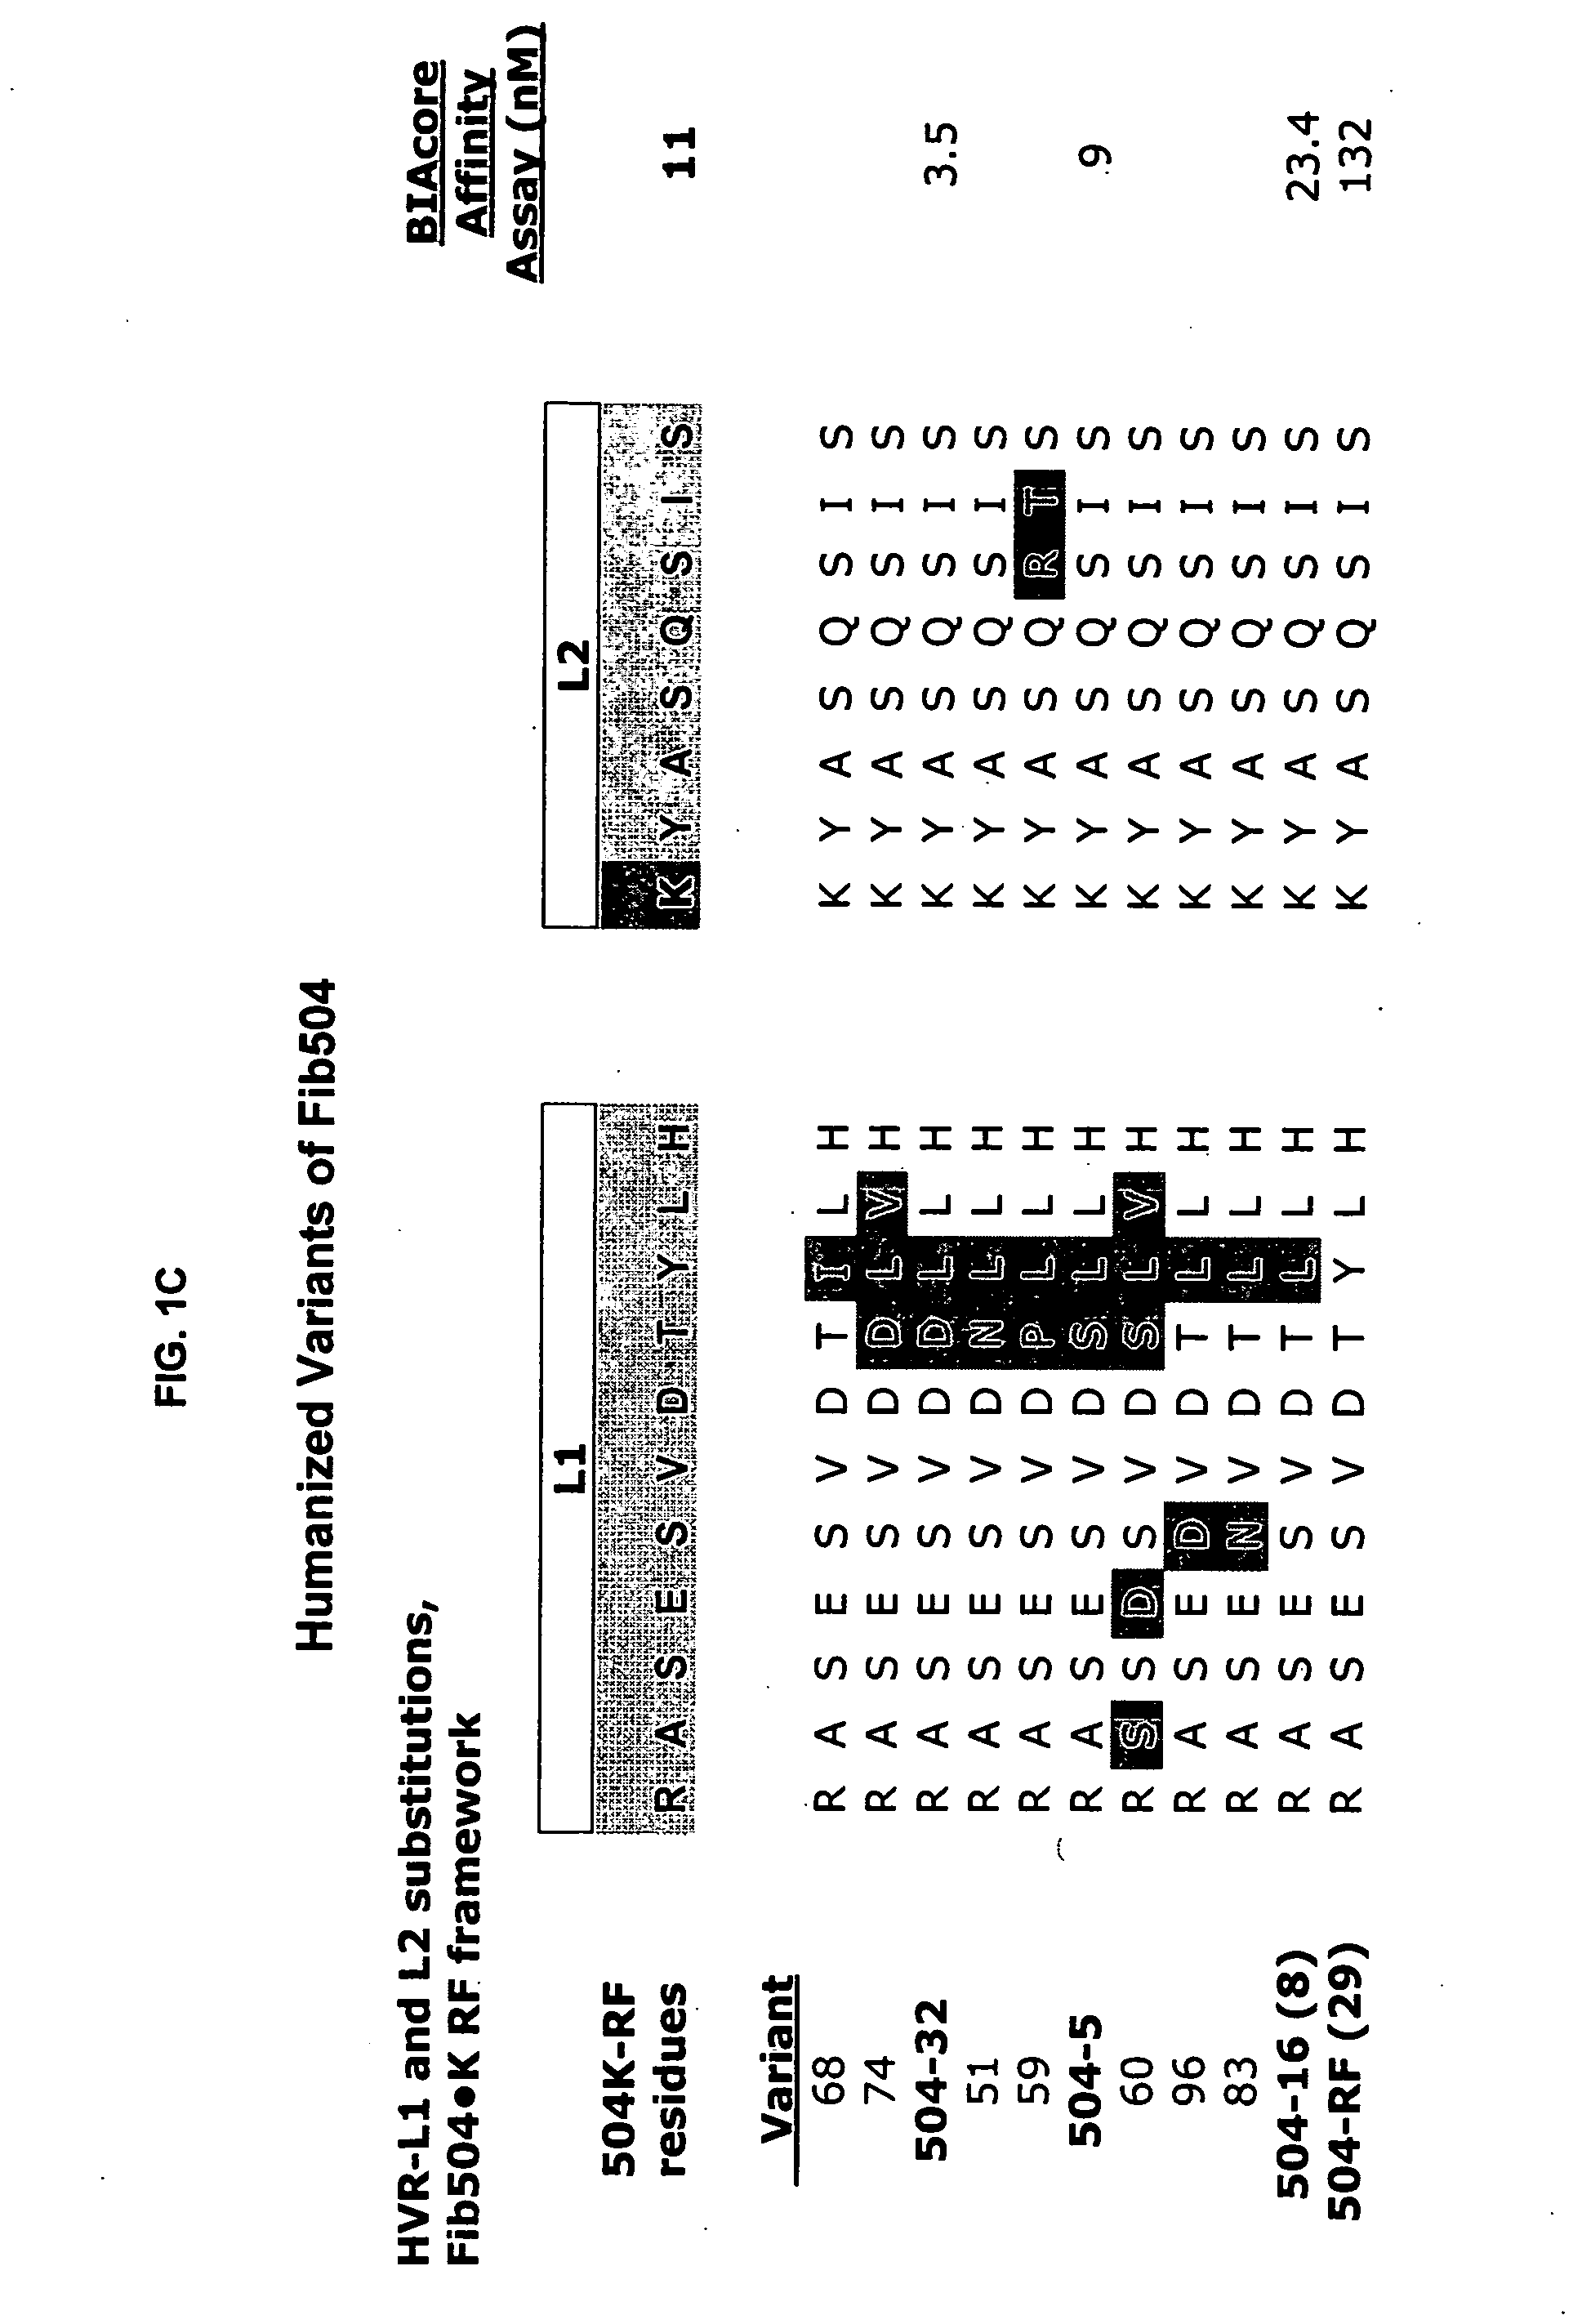 Humanized anti-beta7 antagonists and uses therefor